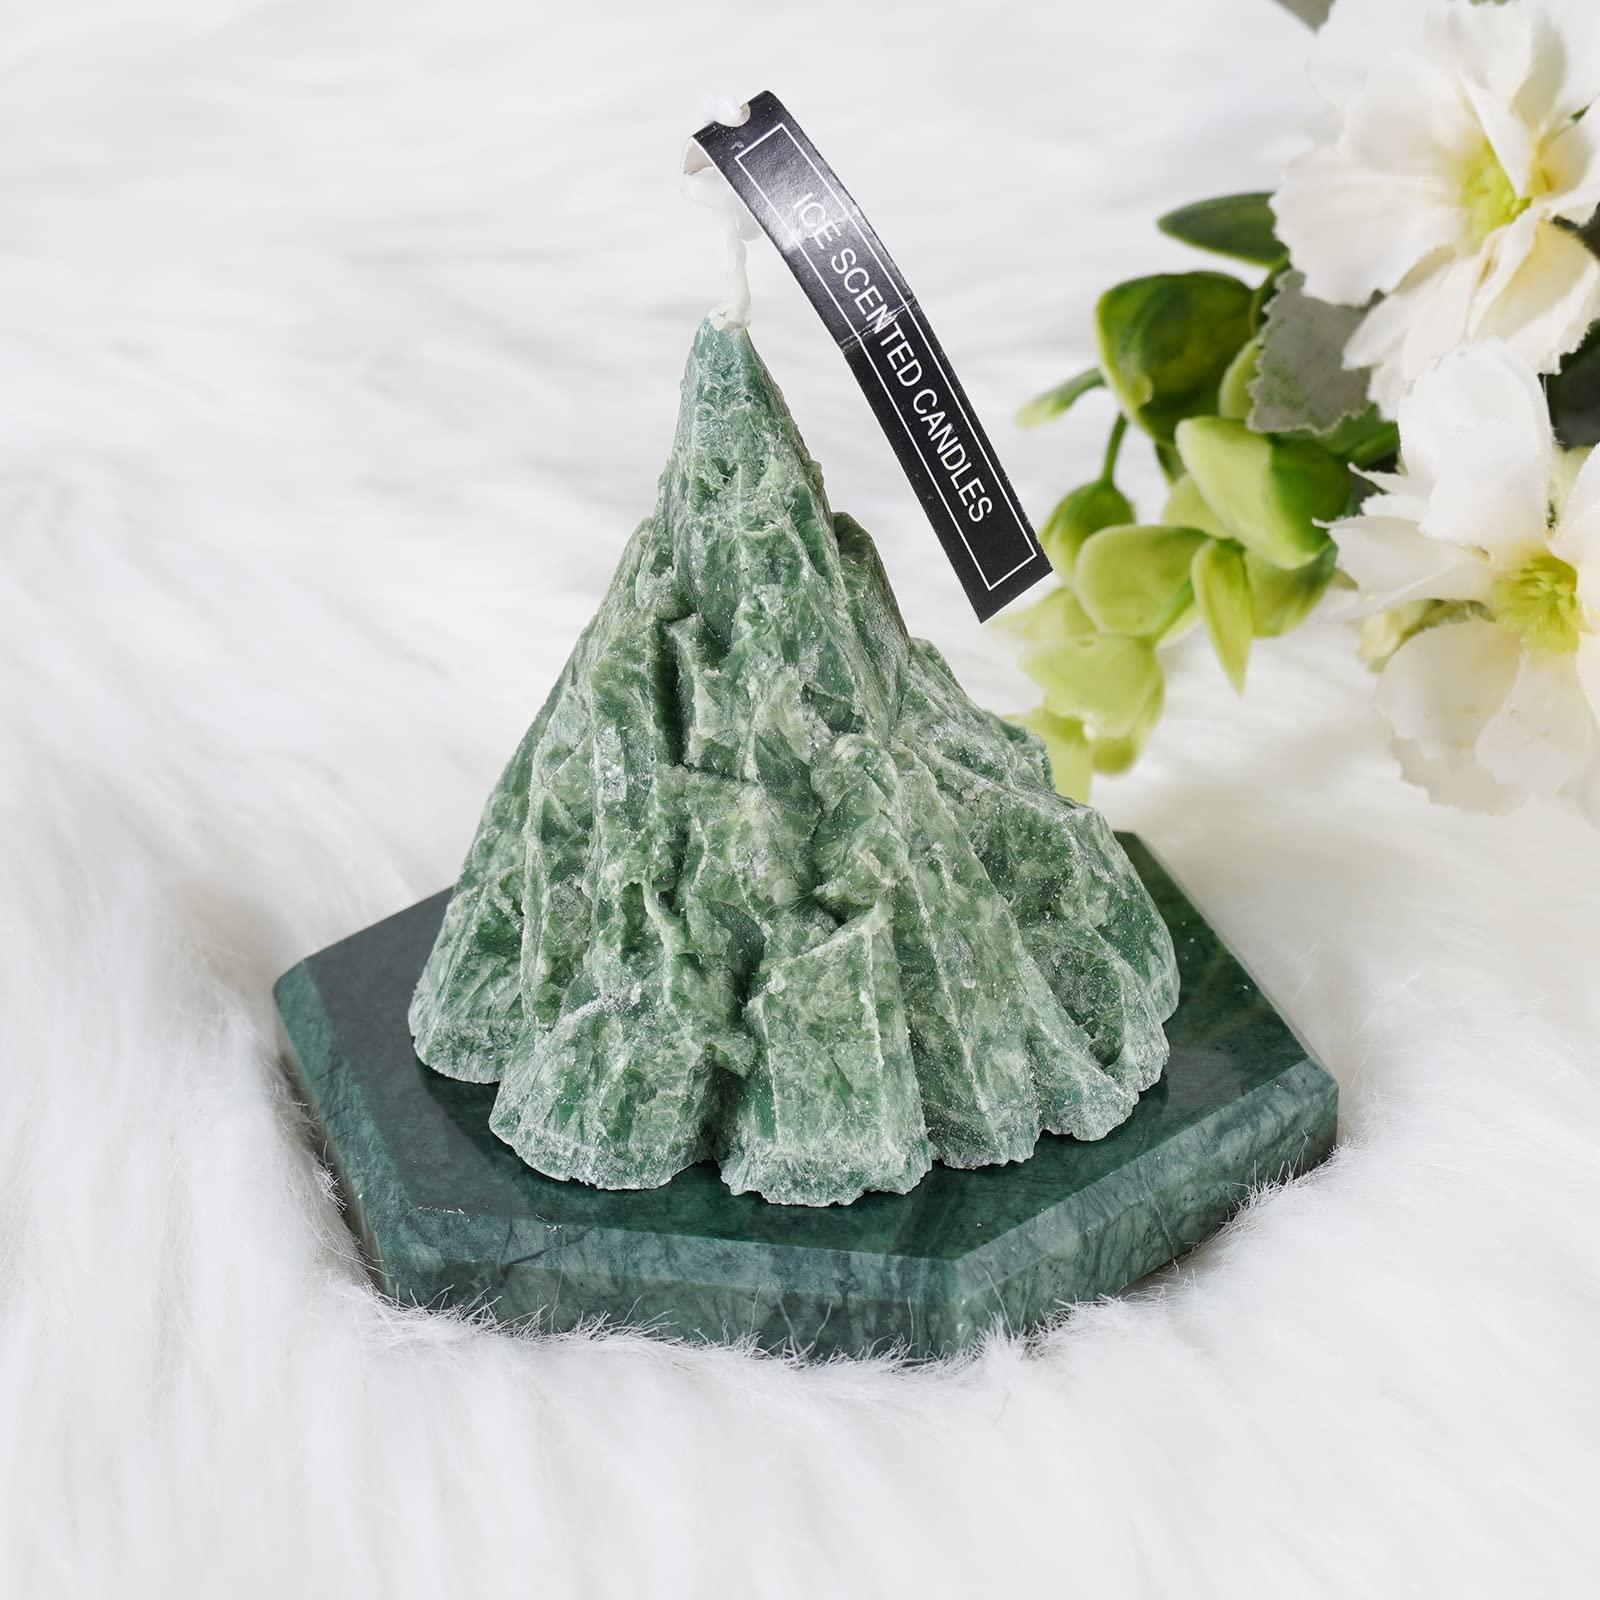 Soulnioi Aromatherapy Gift Scented Candles Marble Green Iceberg Fragrant Candle with Coaster Aroma Wax Flakes Fragrant Hanging Tablets Green Christmas Tree for Wedding Birthday Decor Women Gift 3